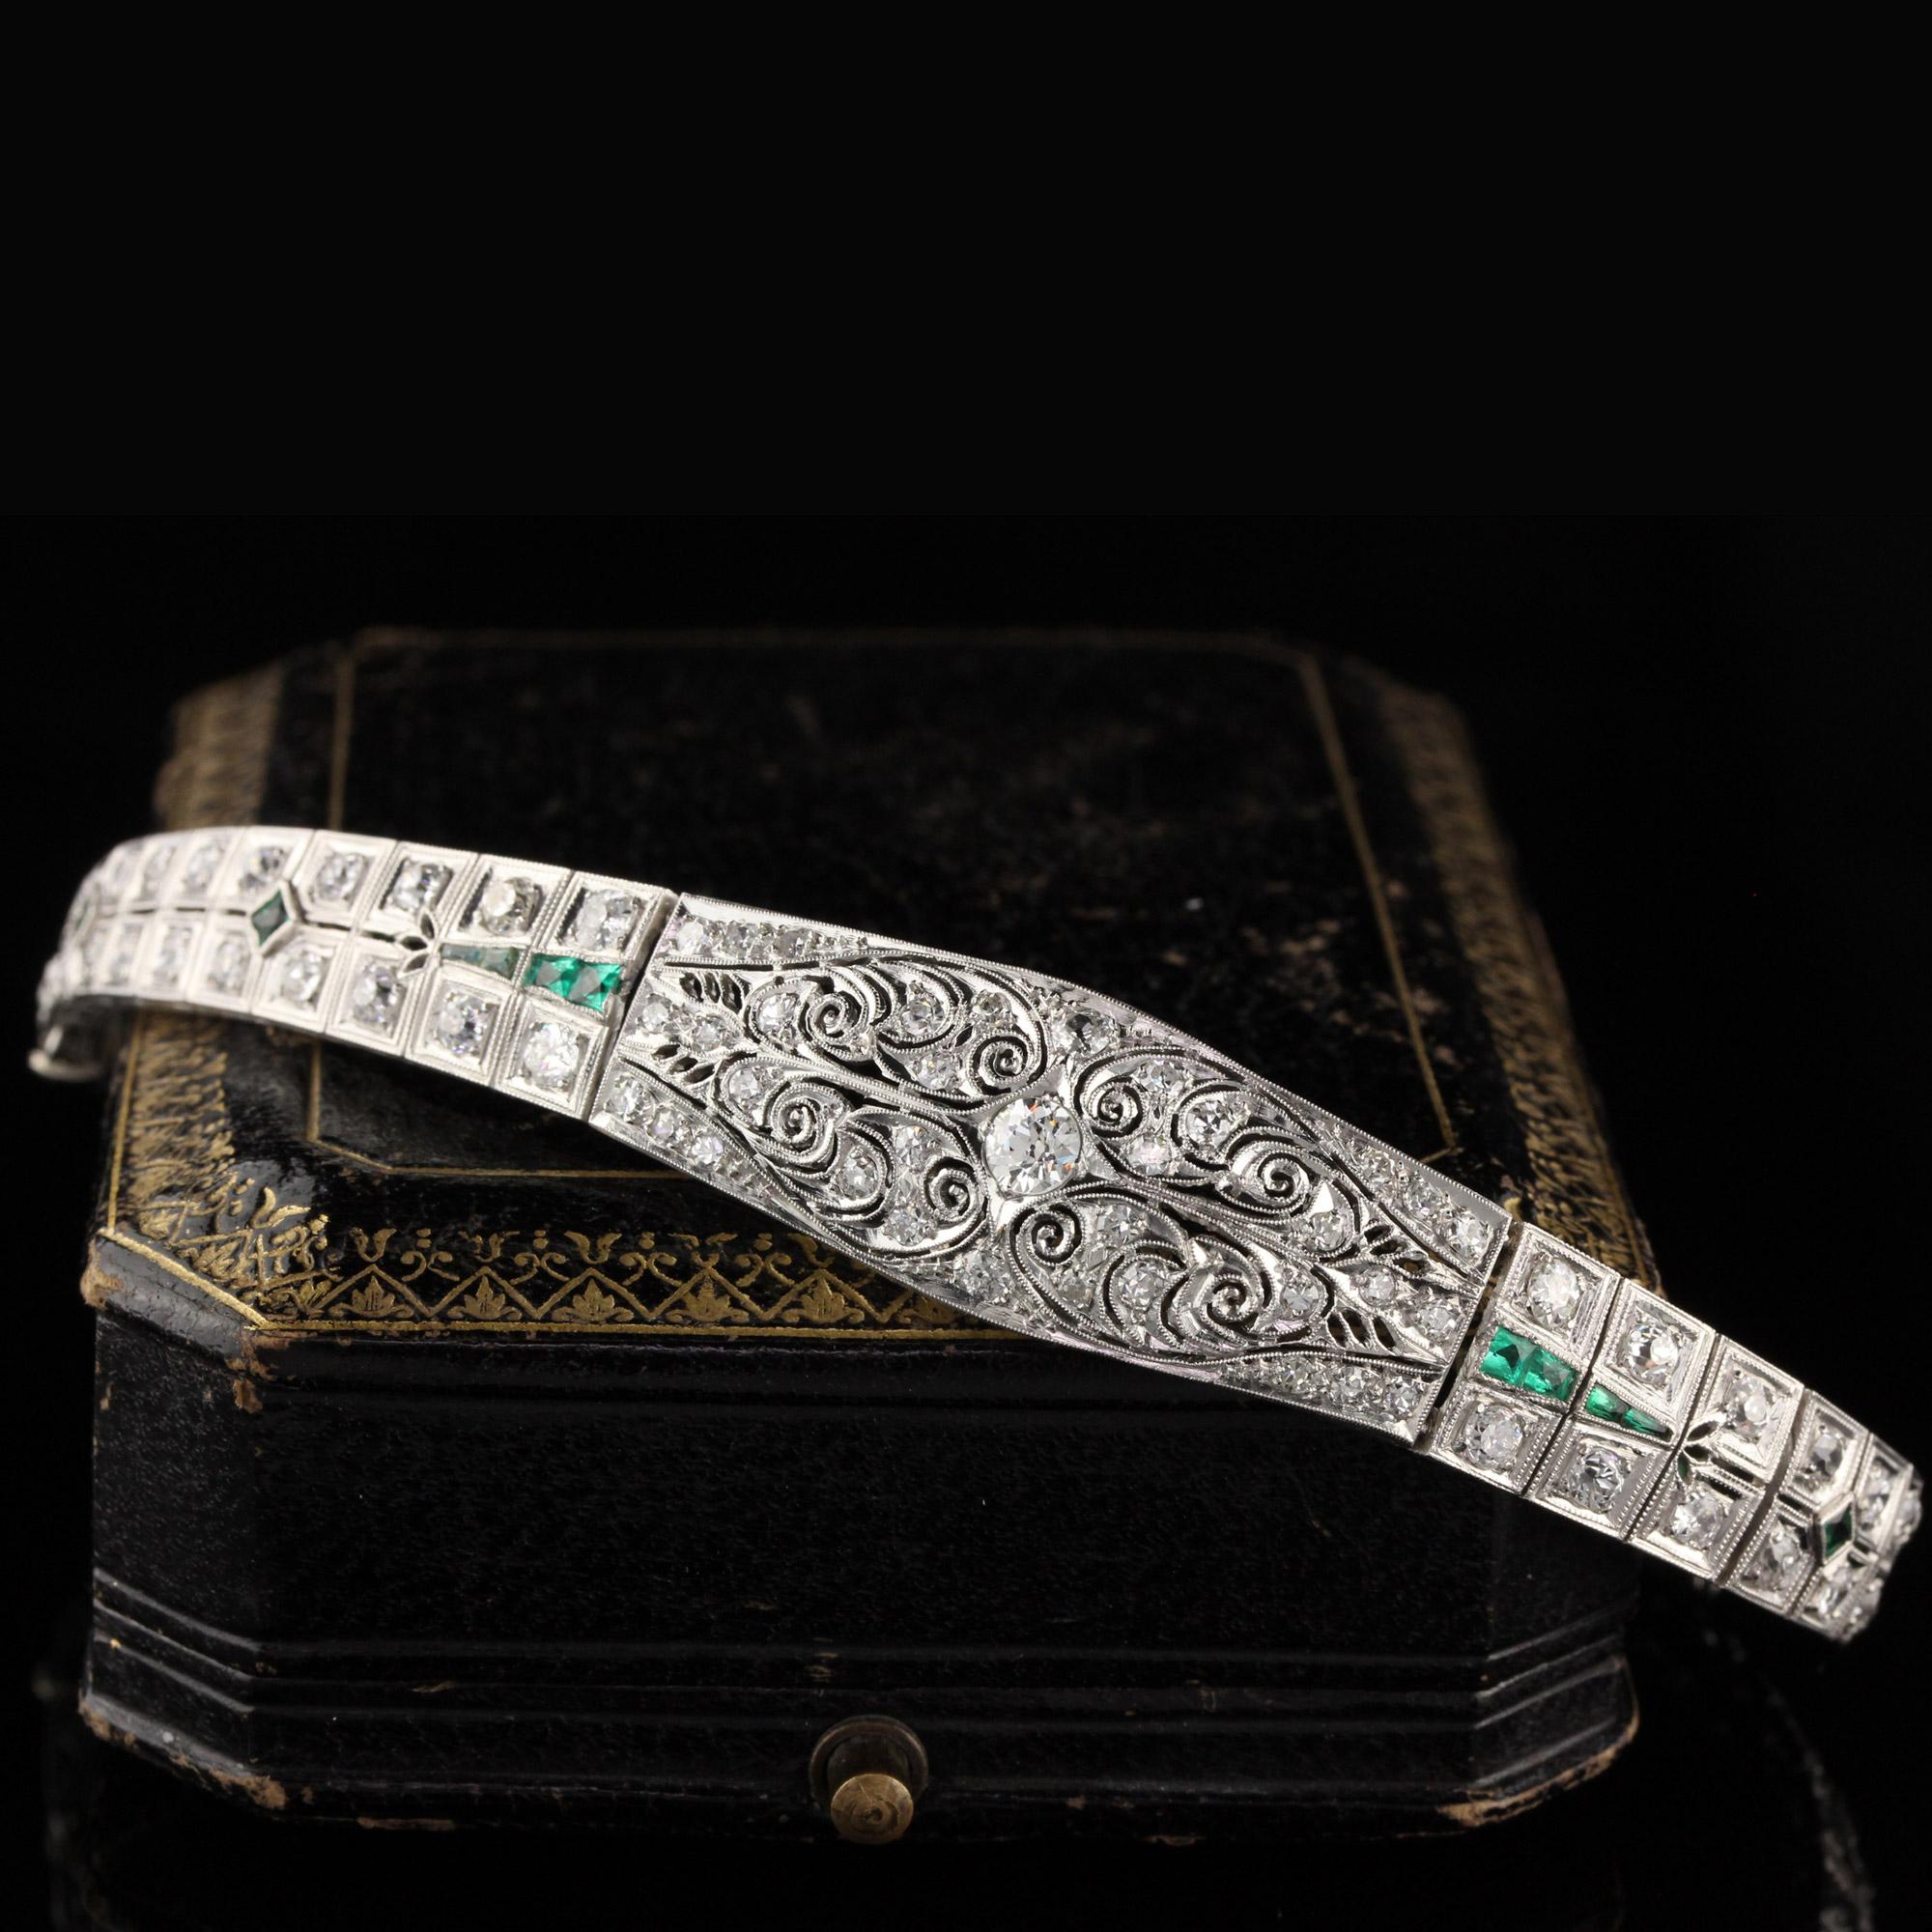 Stunning antique platinum bracelet with old european cut diamonds and emeralds. 

Item #B0024

Metal: Platinum

Weight: 29.3 Grams

Total Diamond Weight: Approximately 5.50 cts

Diamond Color: H

Diamond Clarity: VS2 - SI1

Measurements: 7 in x 5.5